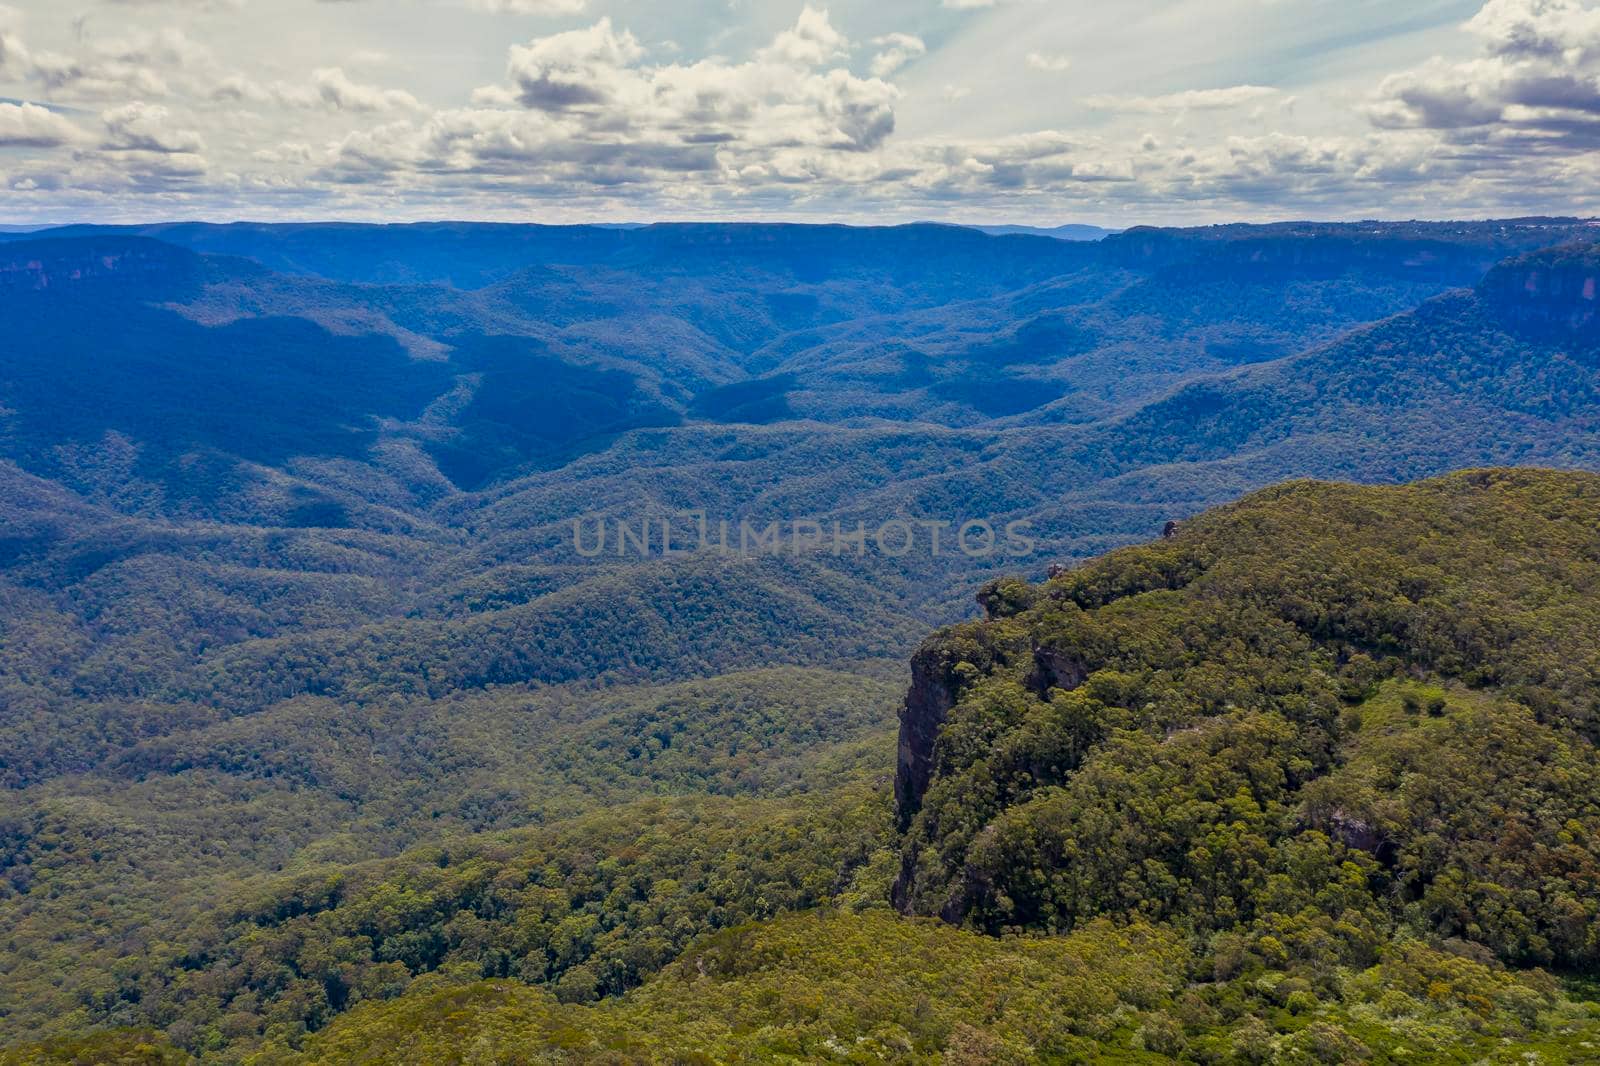 Aerial view of the Jamison Valley near Wentworth Falls in The Blue Mountains in regional New South Wales in Australia